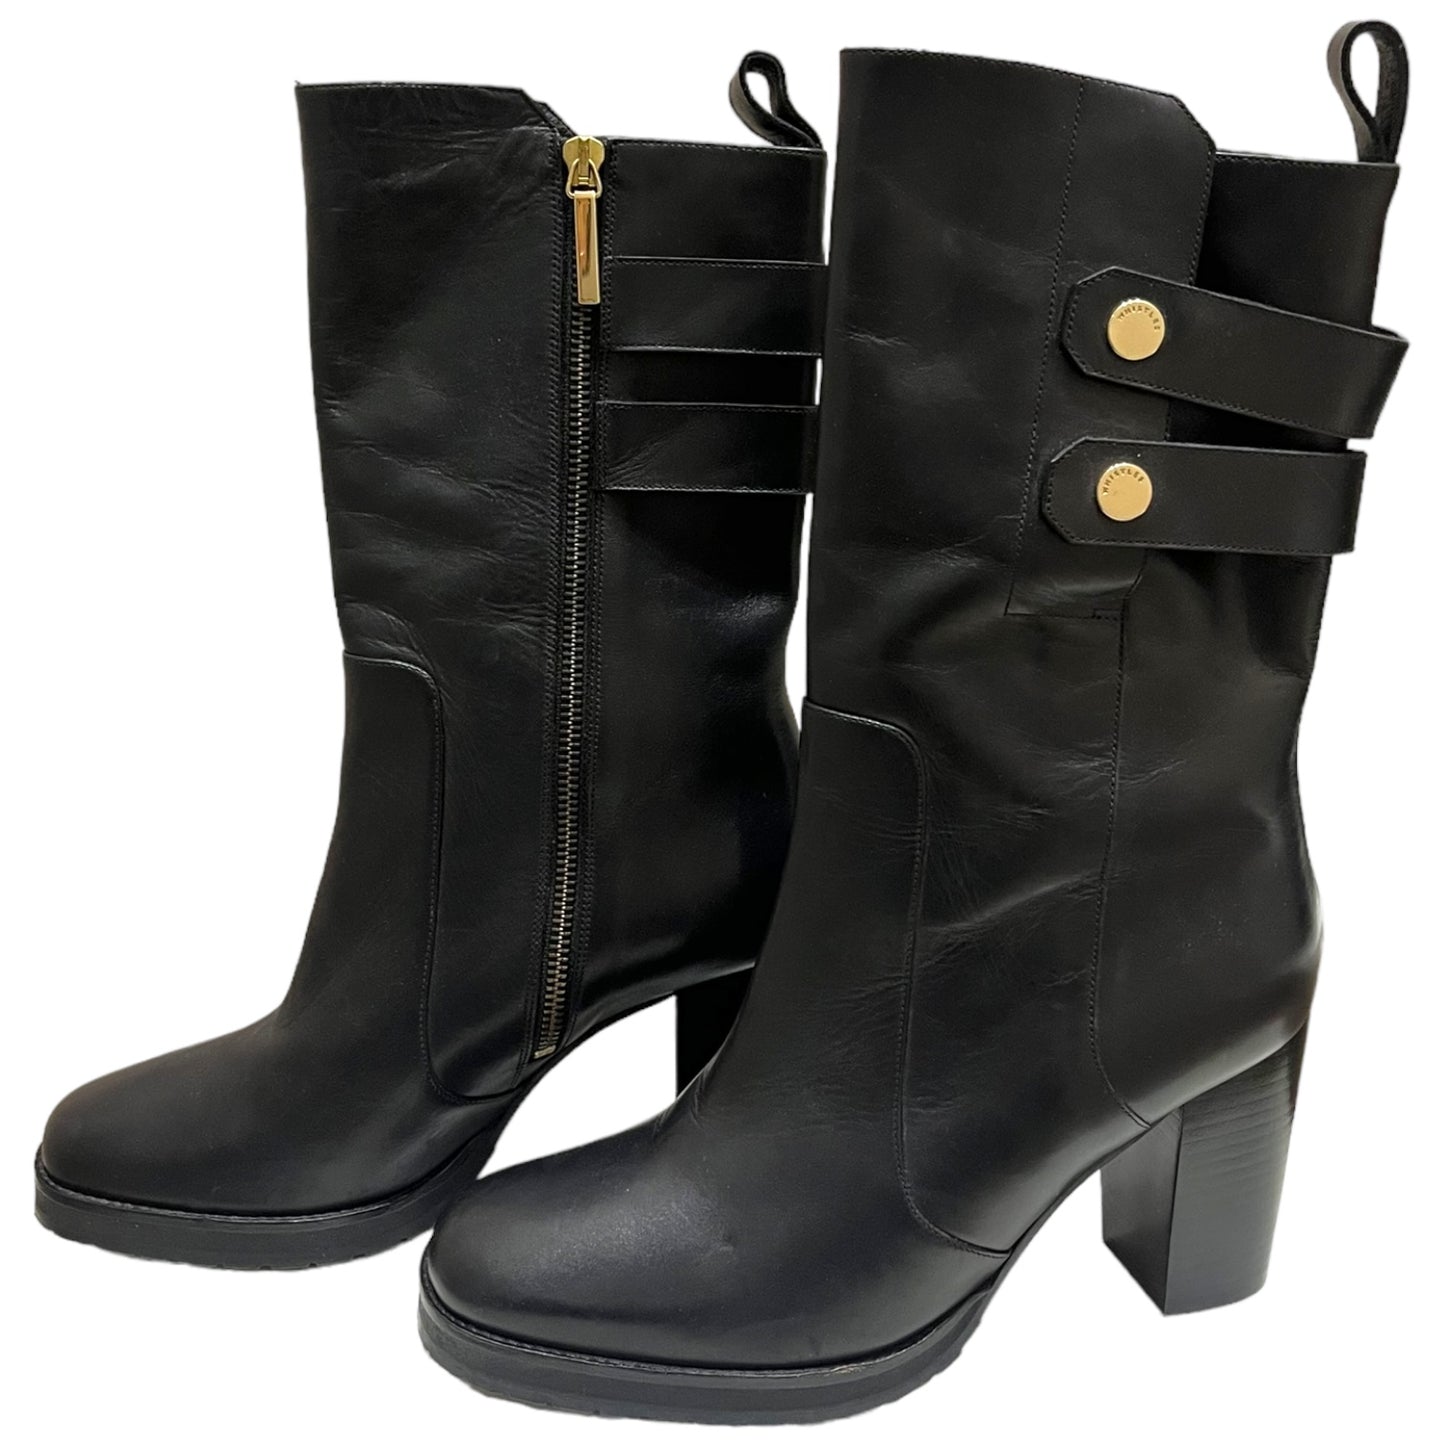 Whistles Black Heeled Boots